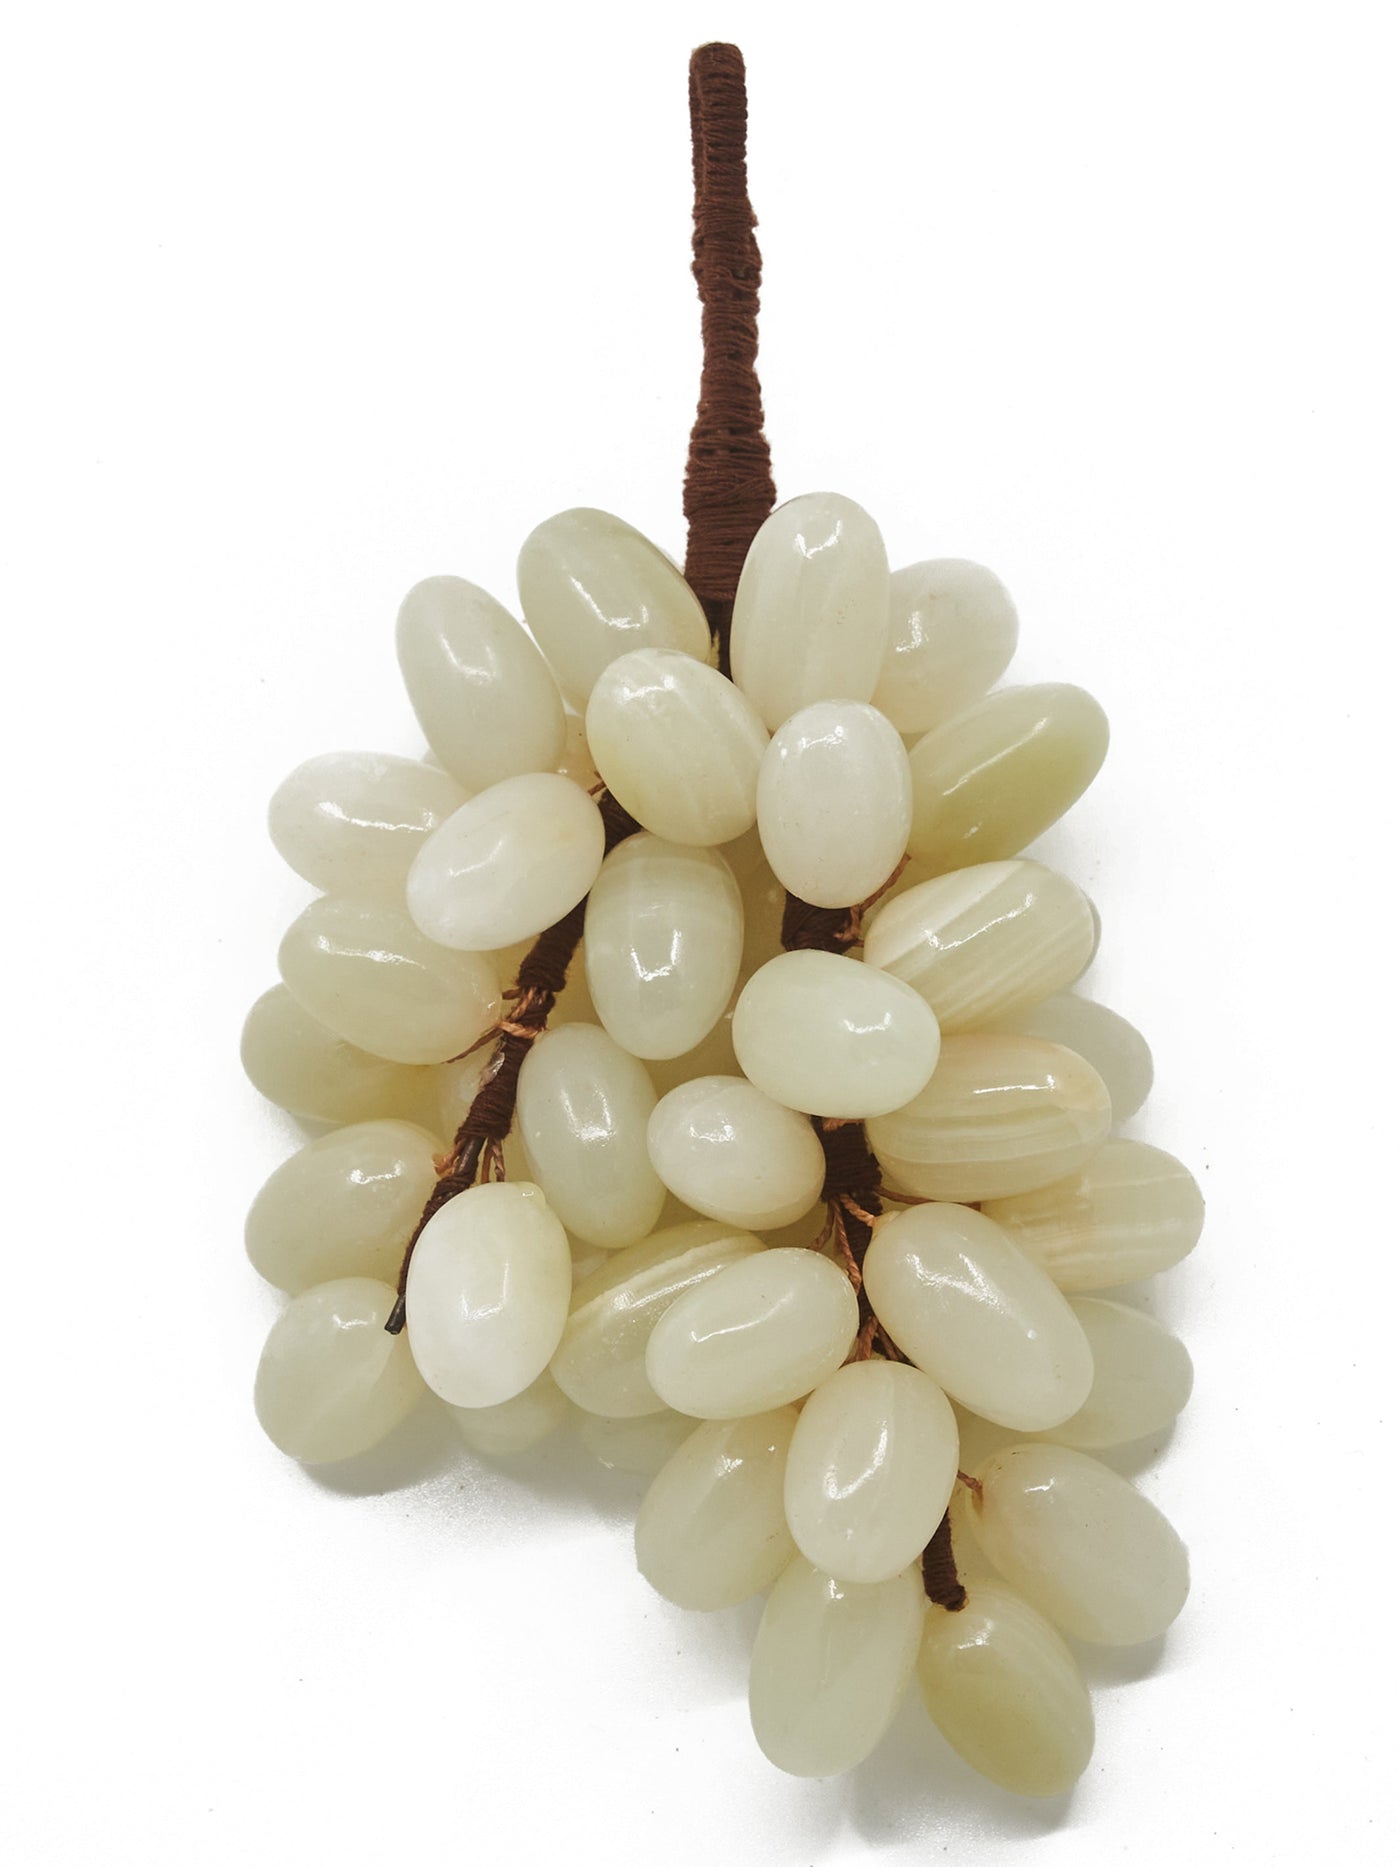 Decorative Onyx Grape Bunch by Permanent Resident